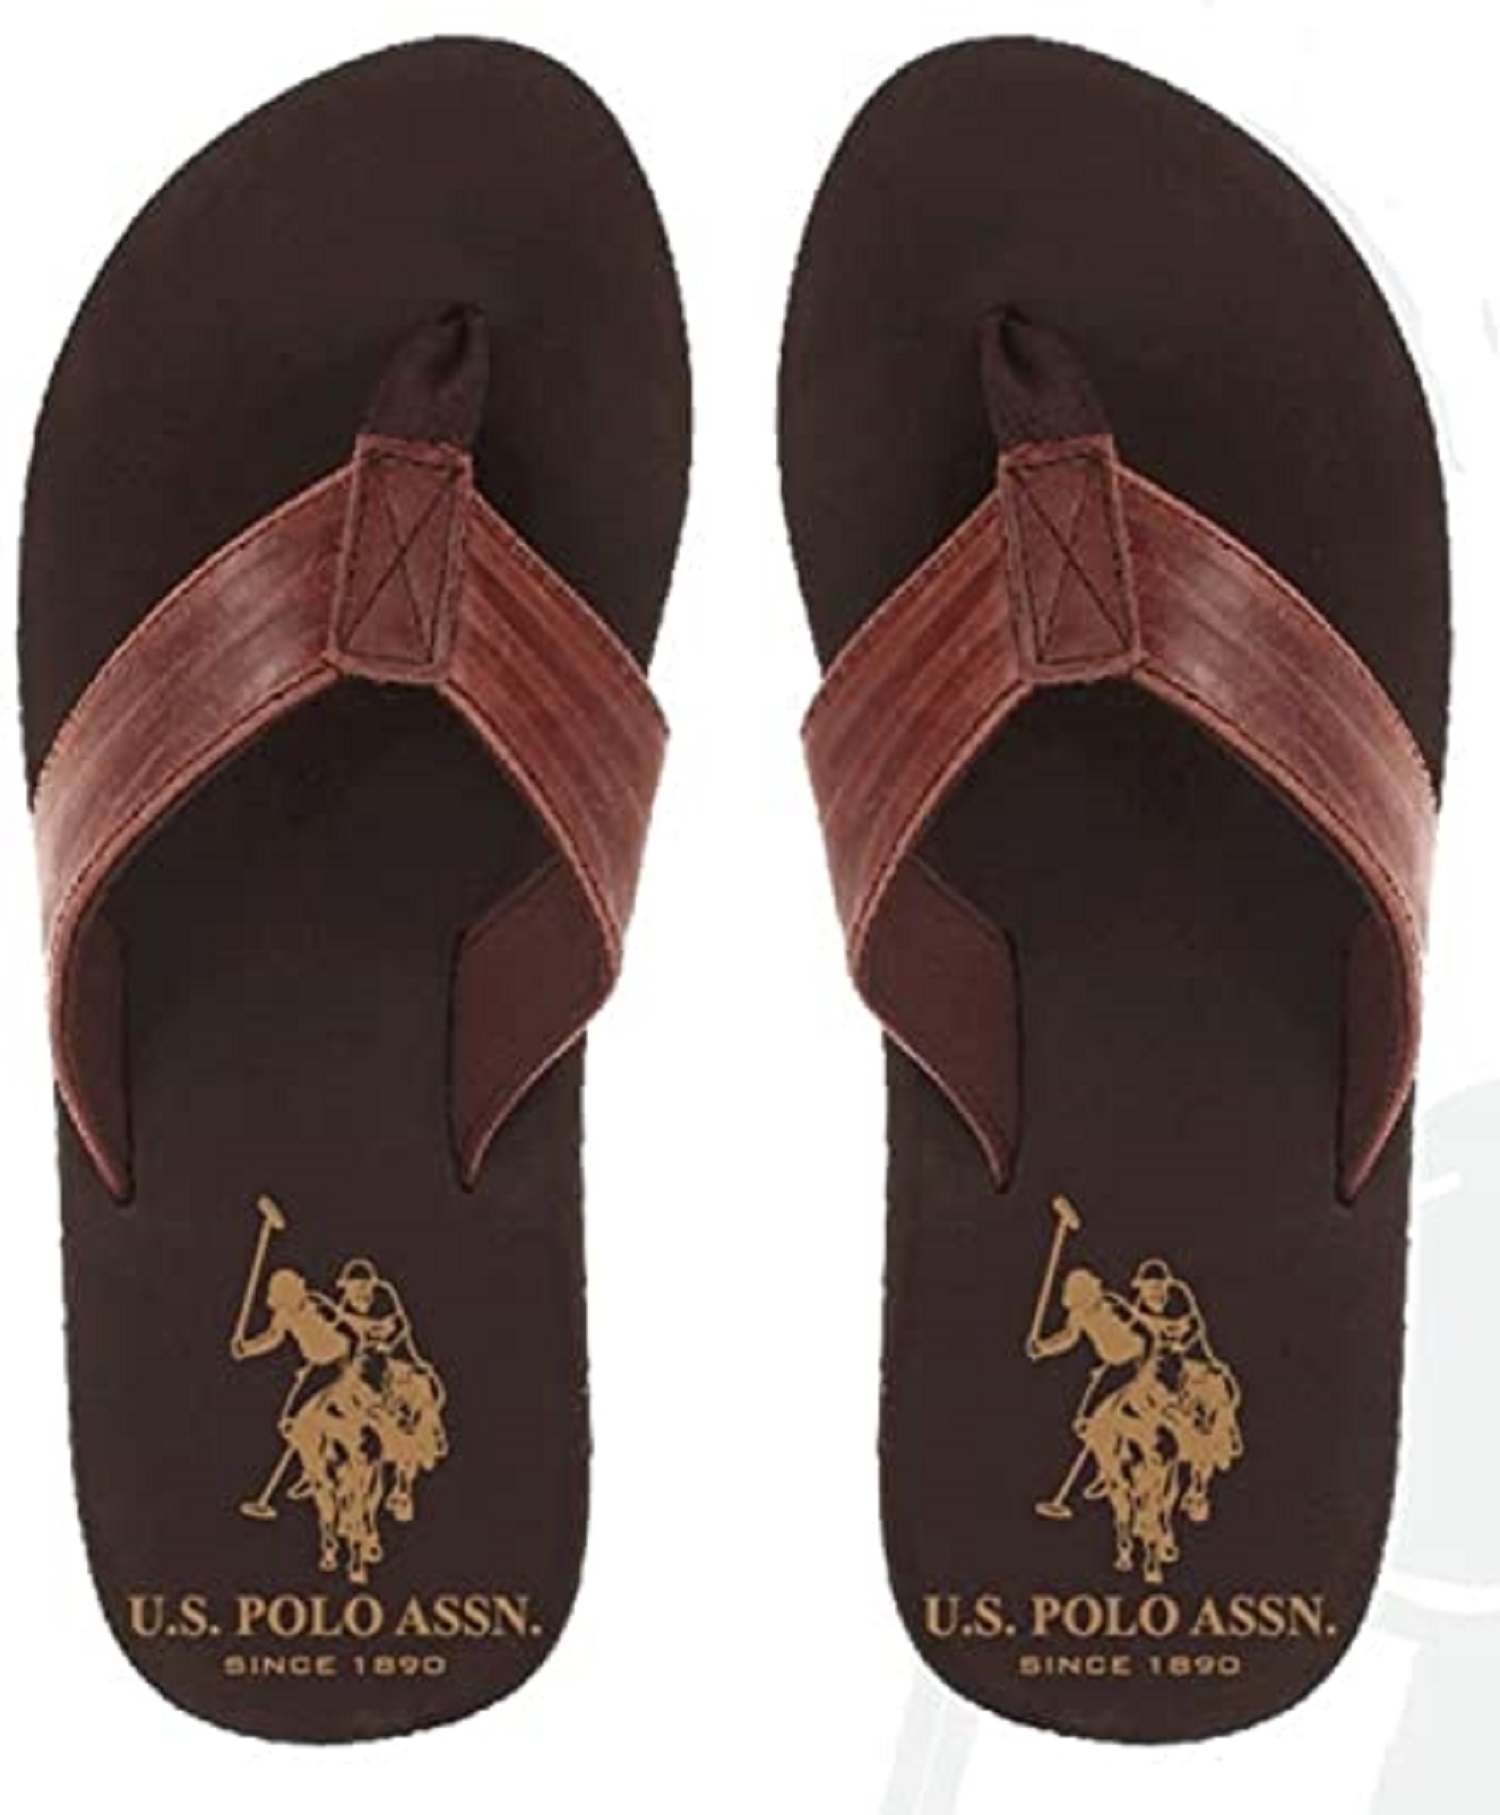 U.S. Polo Assn. Adult Men Premium Brown Leatherette Water Friendly Sandal Flip Flop Thong (Size Small) - image 1 of 3